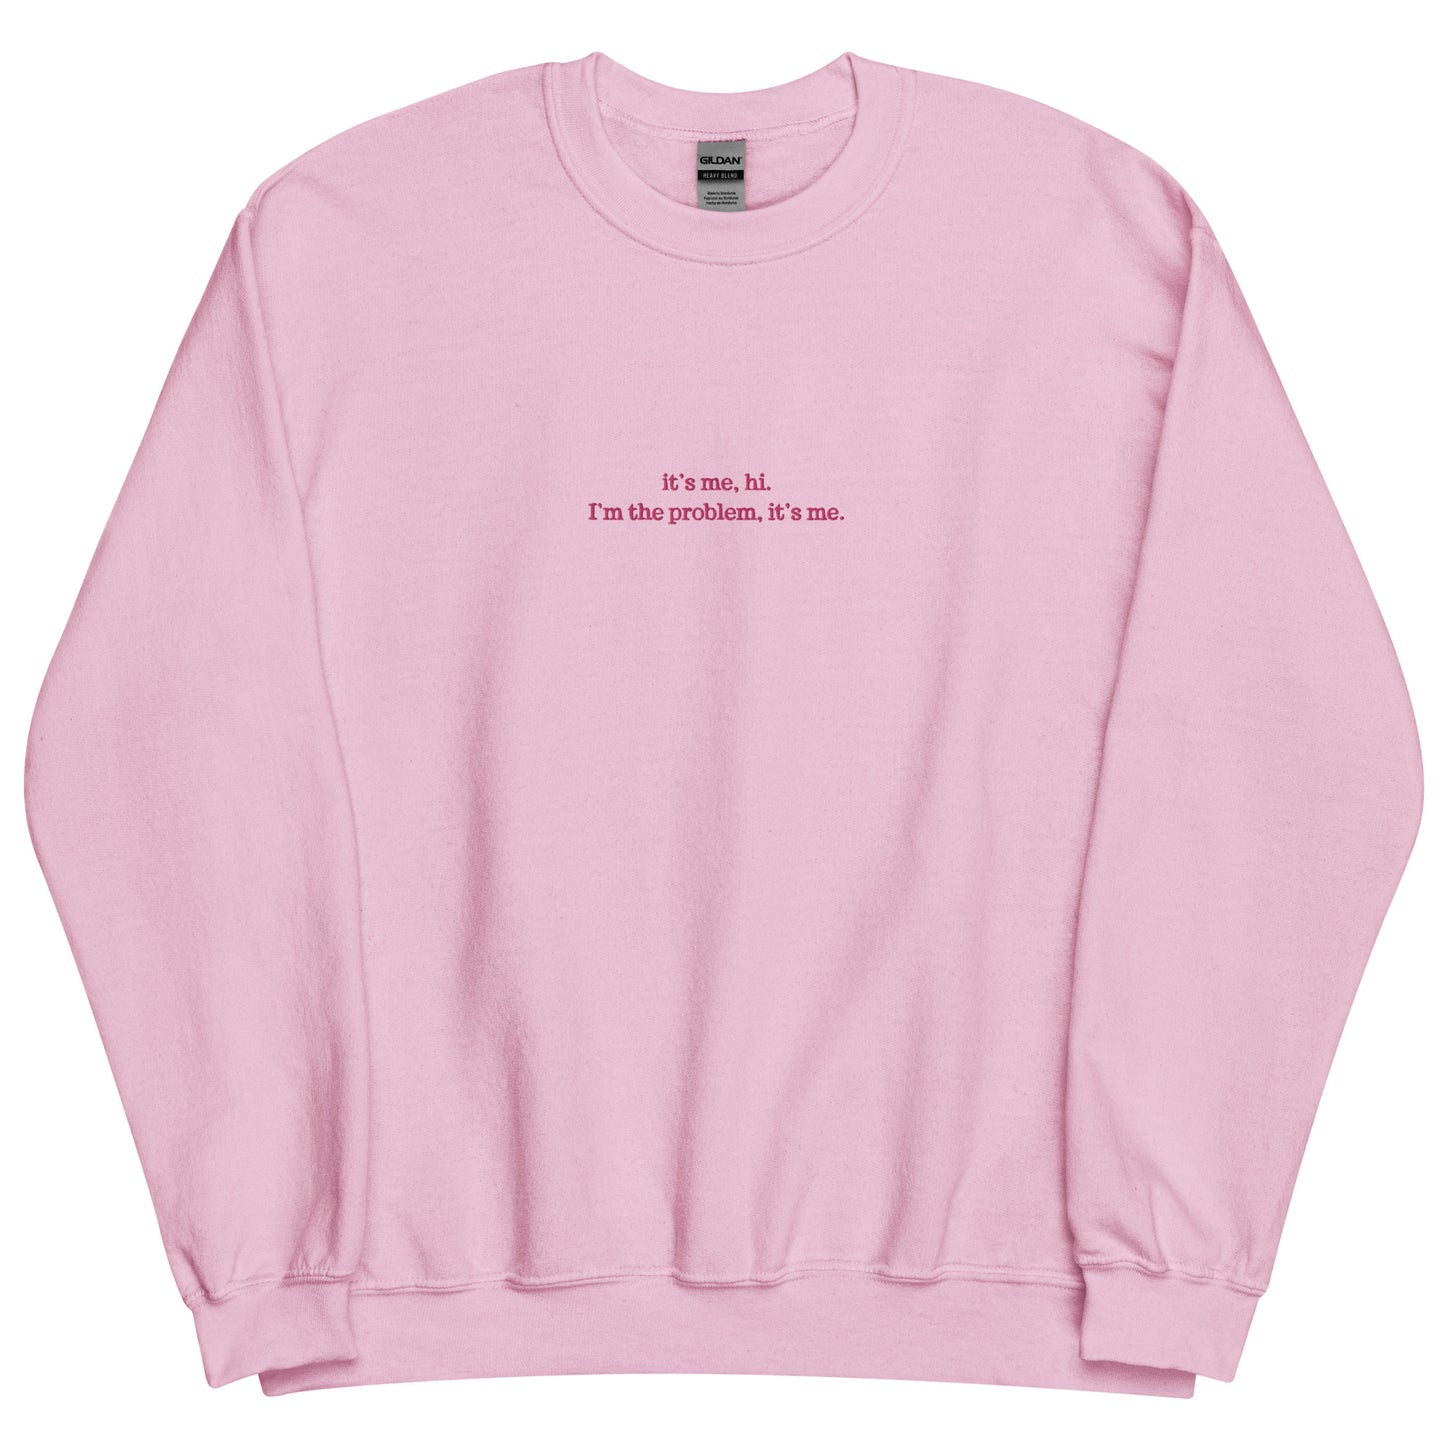 it’s me, hi. - Embroidered Crew Sweatshirt (pink or white)